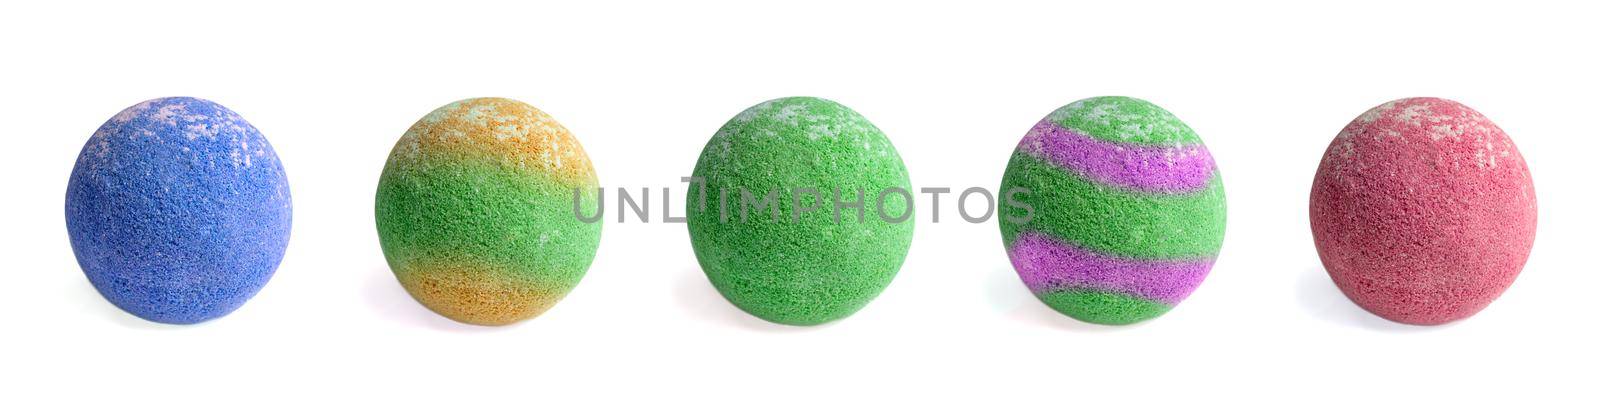 Set of aromatic bath bombs on a white background. aromatic bath balls of different colors